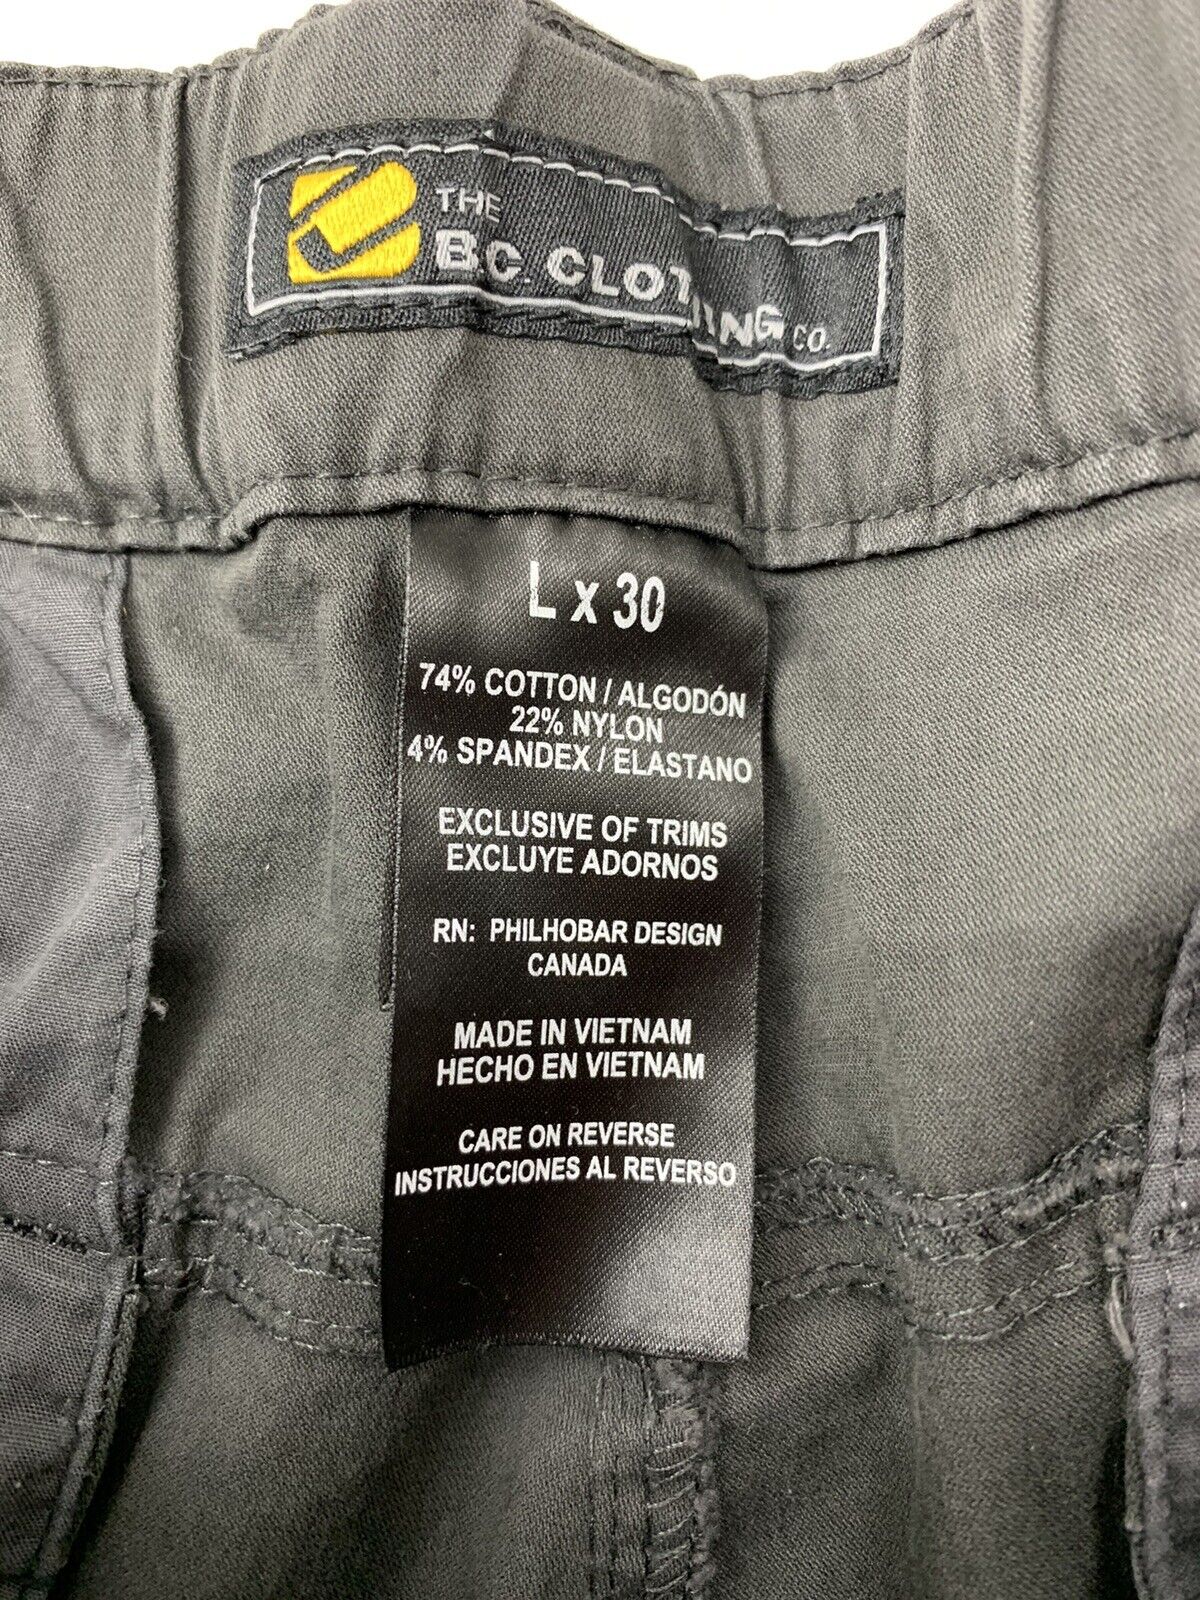 Vintage Oversized Cargo Denim Pants With Big Pockets And High Waist For  Women Designer Washed Denims With Wide Leg And Bagged Topsoil Design ZN199  230826 From Lu003, $48.37 | DHgate.Com